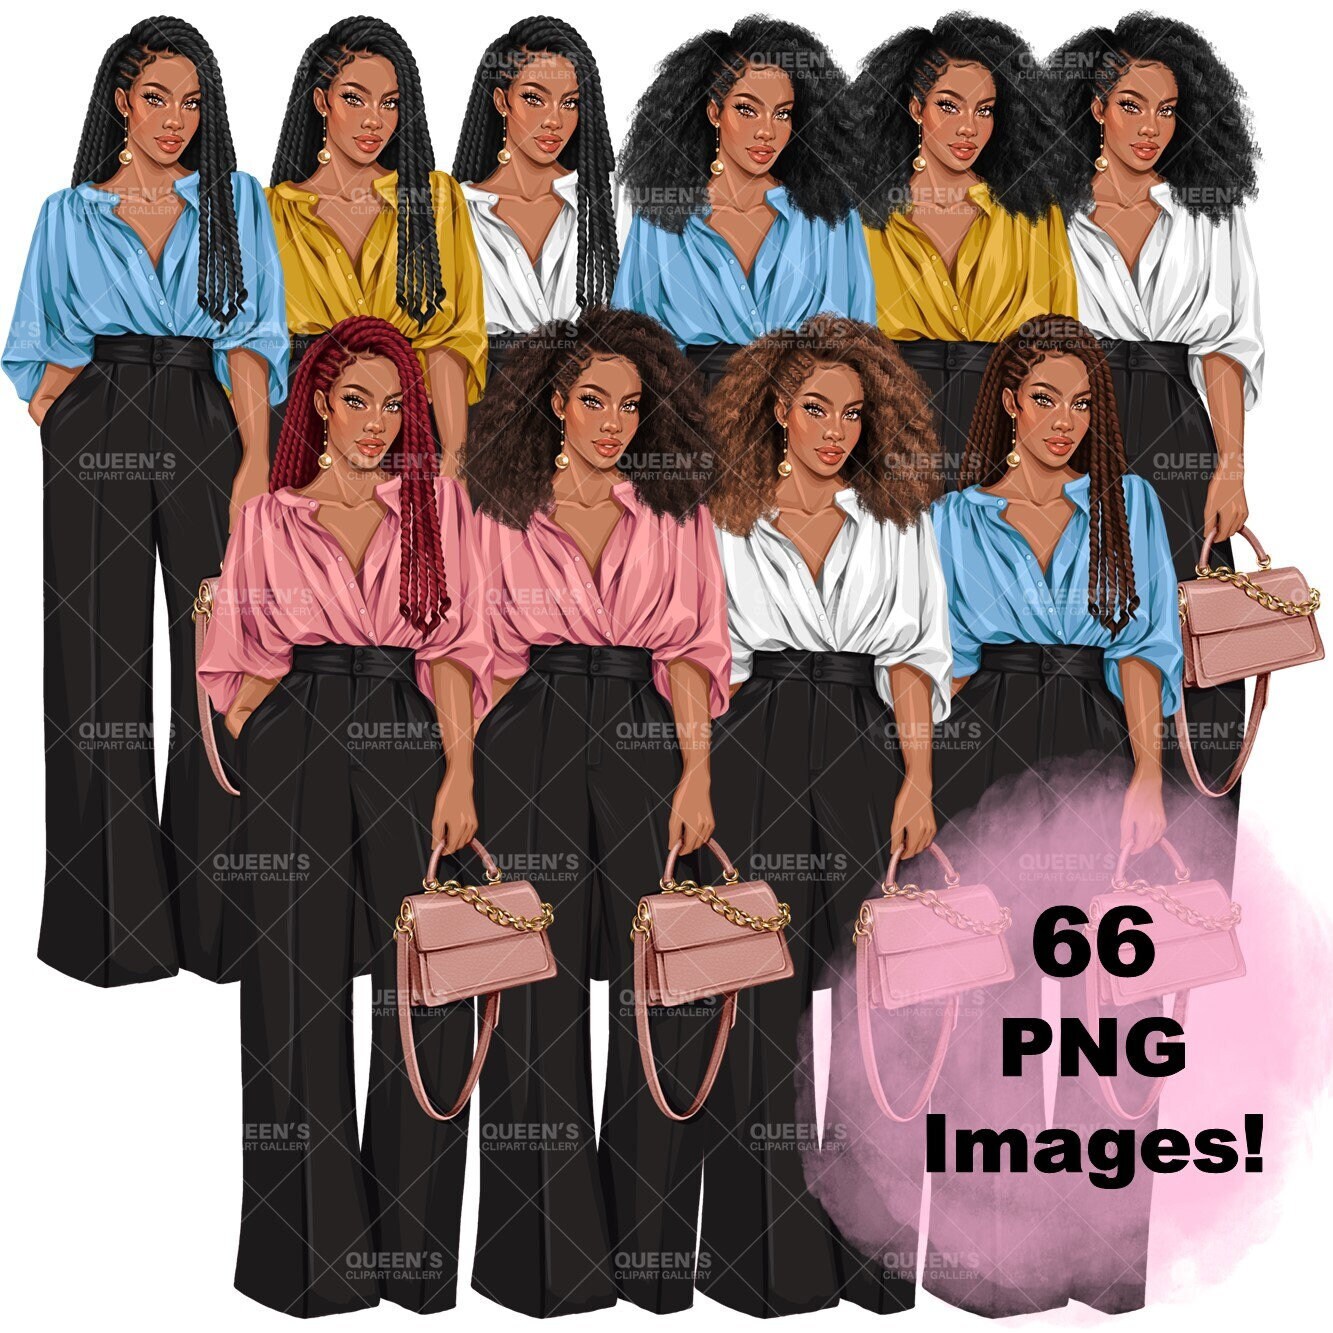 Black girl PNG, Afro girl clipart, Fashion girl clipart, Black woman clipart, Black girl magic, Curvy girl clipart,  African American woman